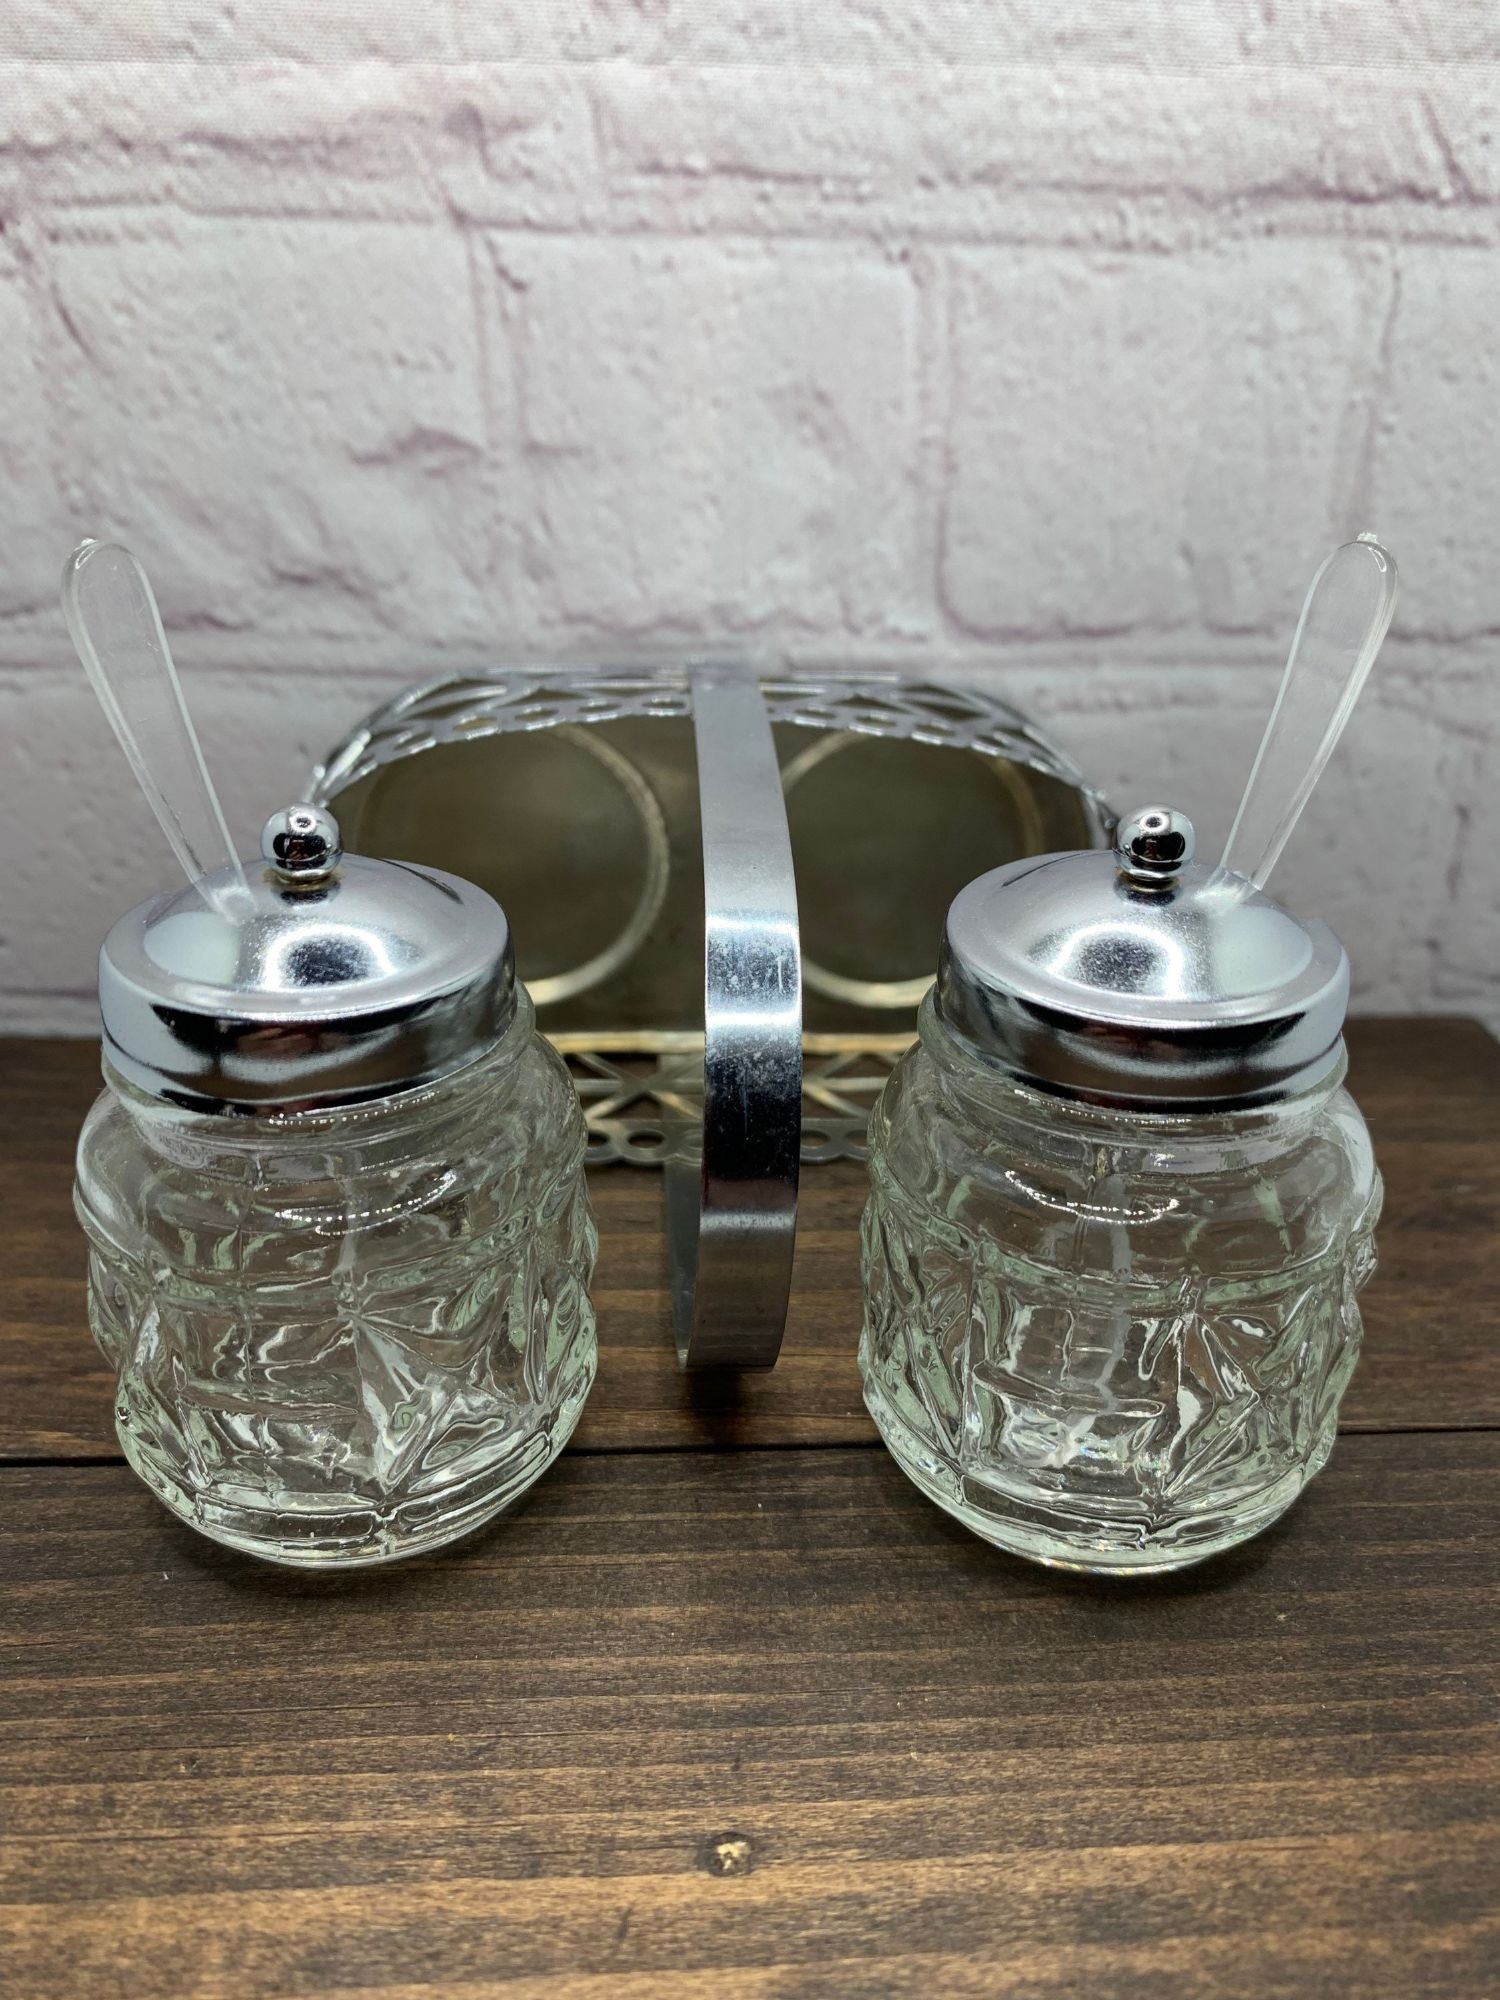 Vintage Pressed Glass Salt & Pepper Shakers, Condiment Set w/ Serving Spoons, Chrome Lids and Caddy - 1960s